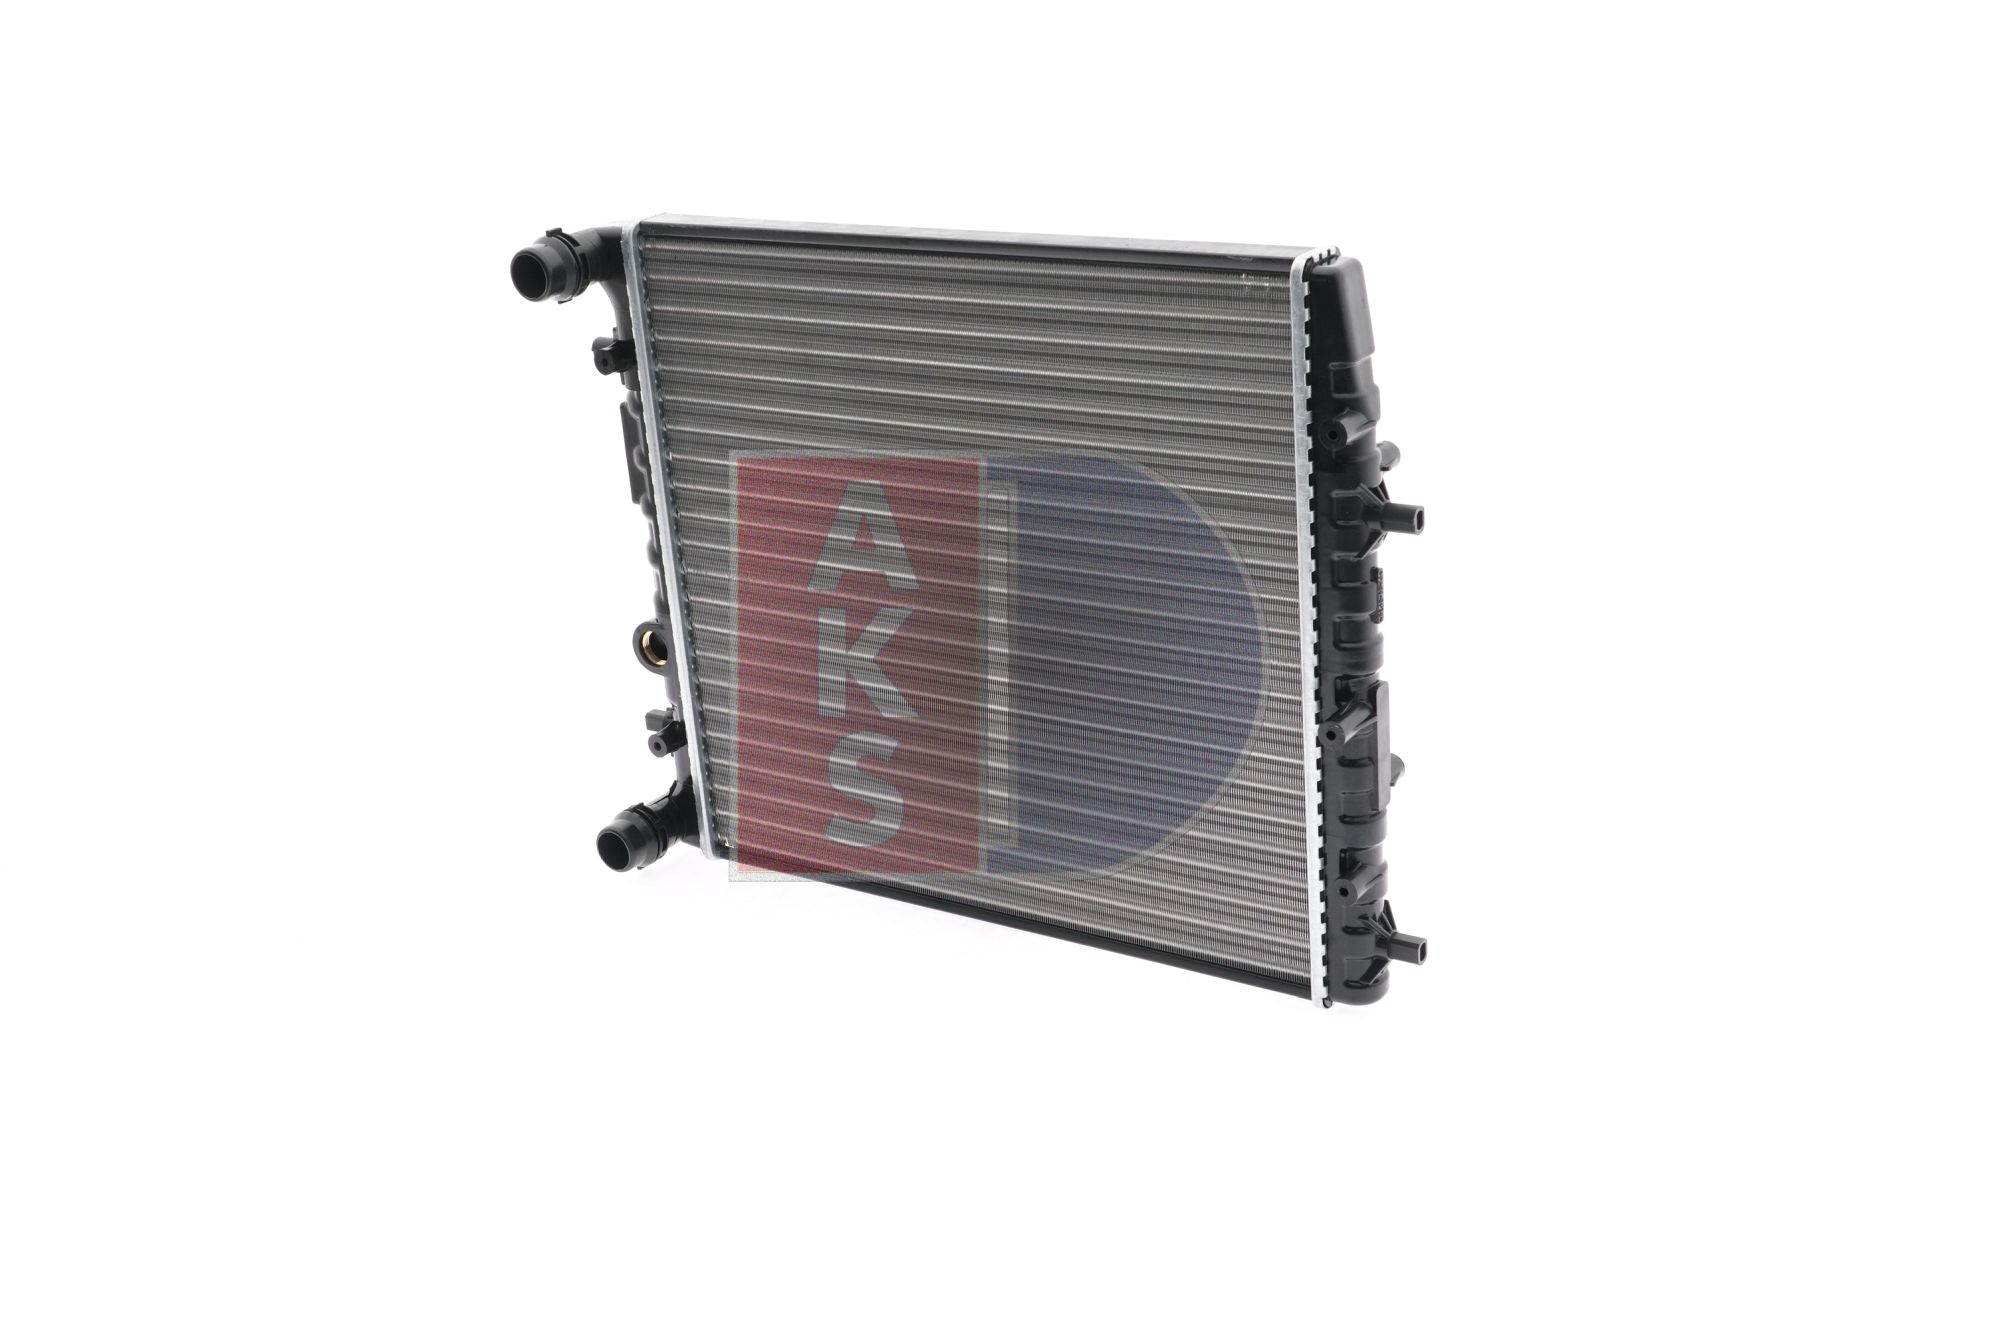 AKS DASIS 491120N Engine radiator 430 x 415 x 23 mm, Mechanically jointed cooling fins